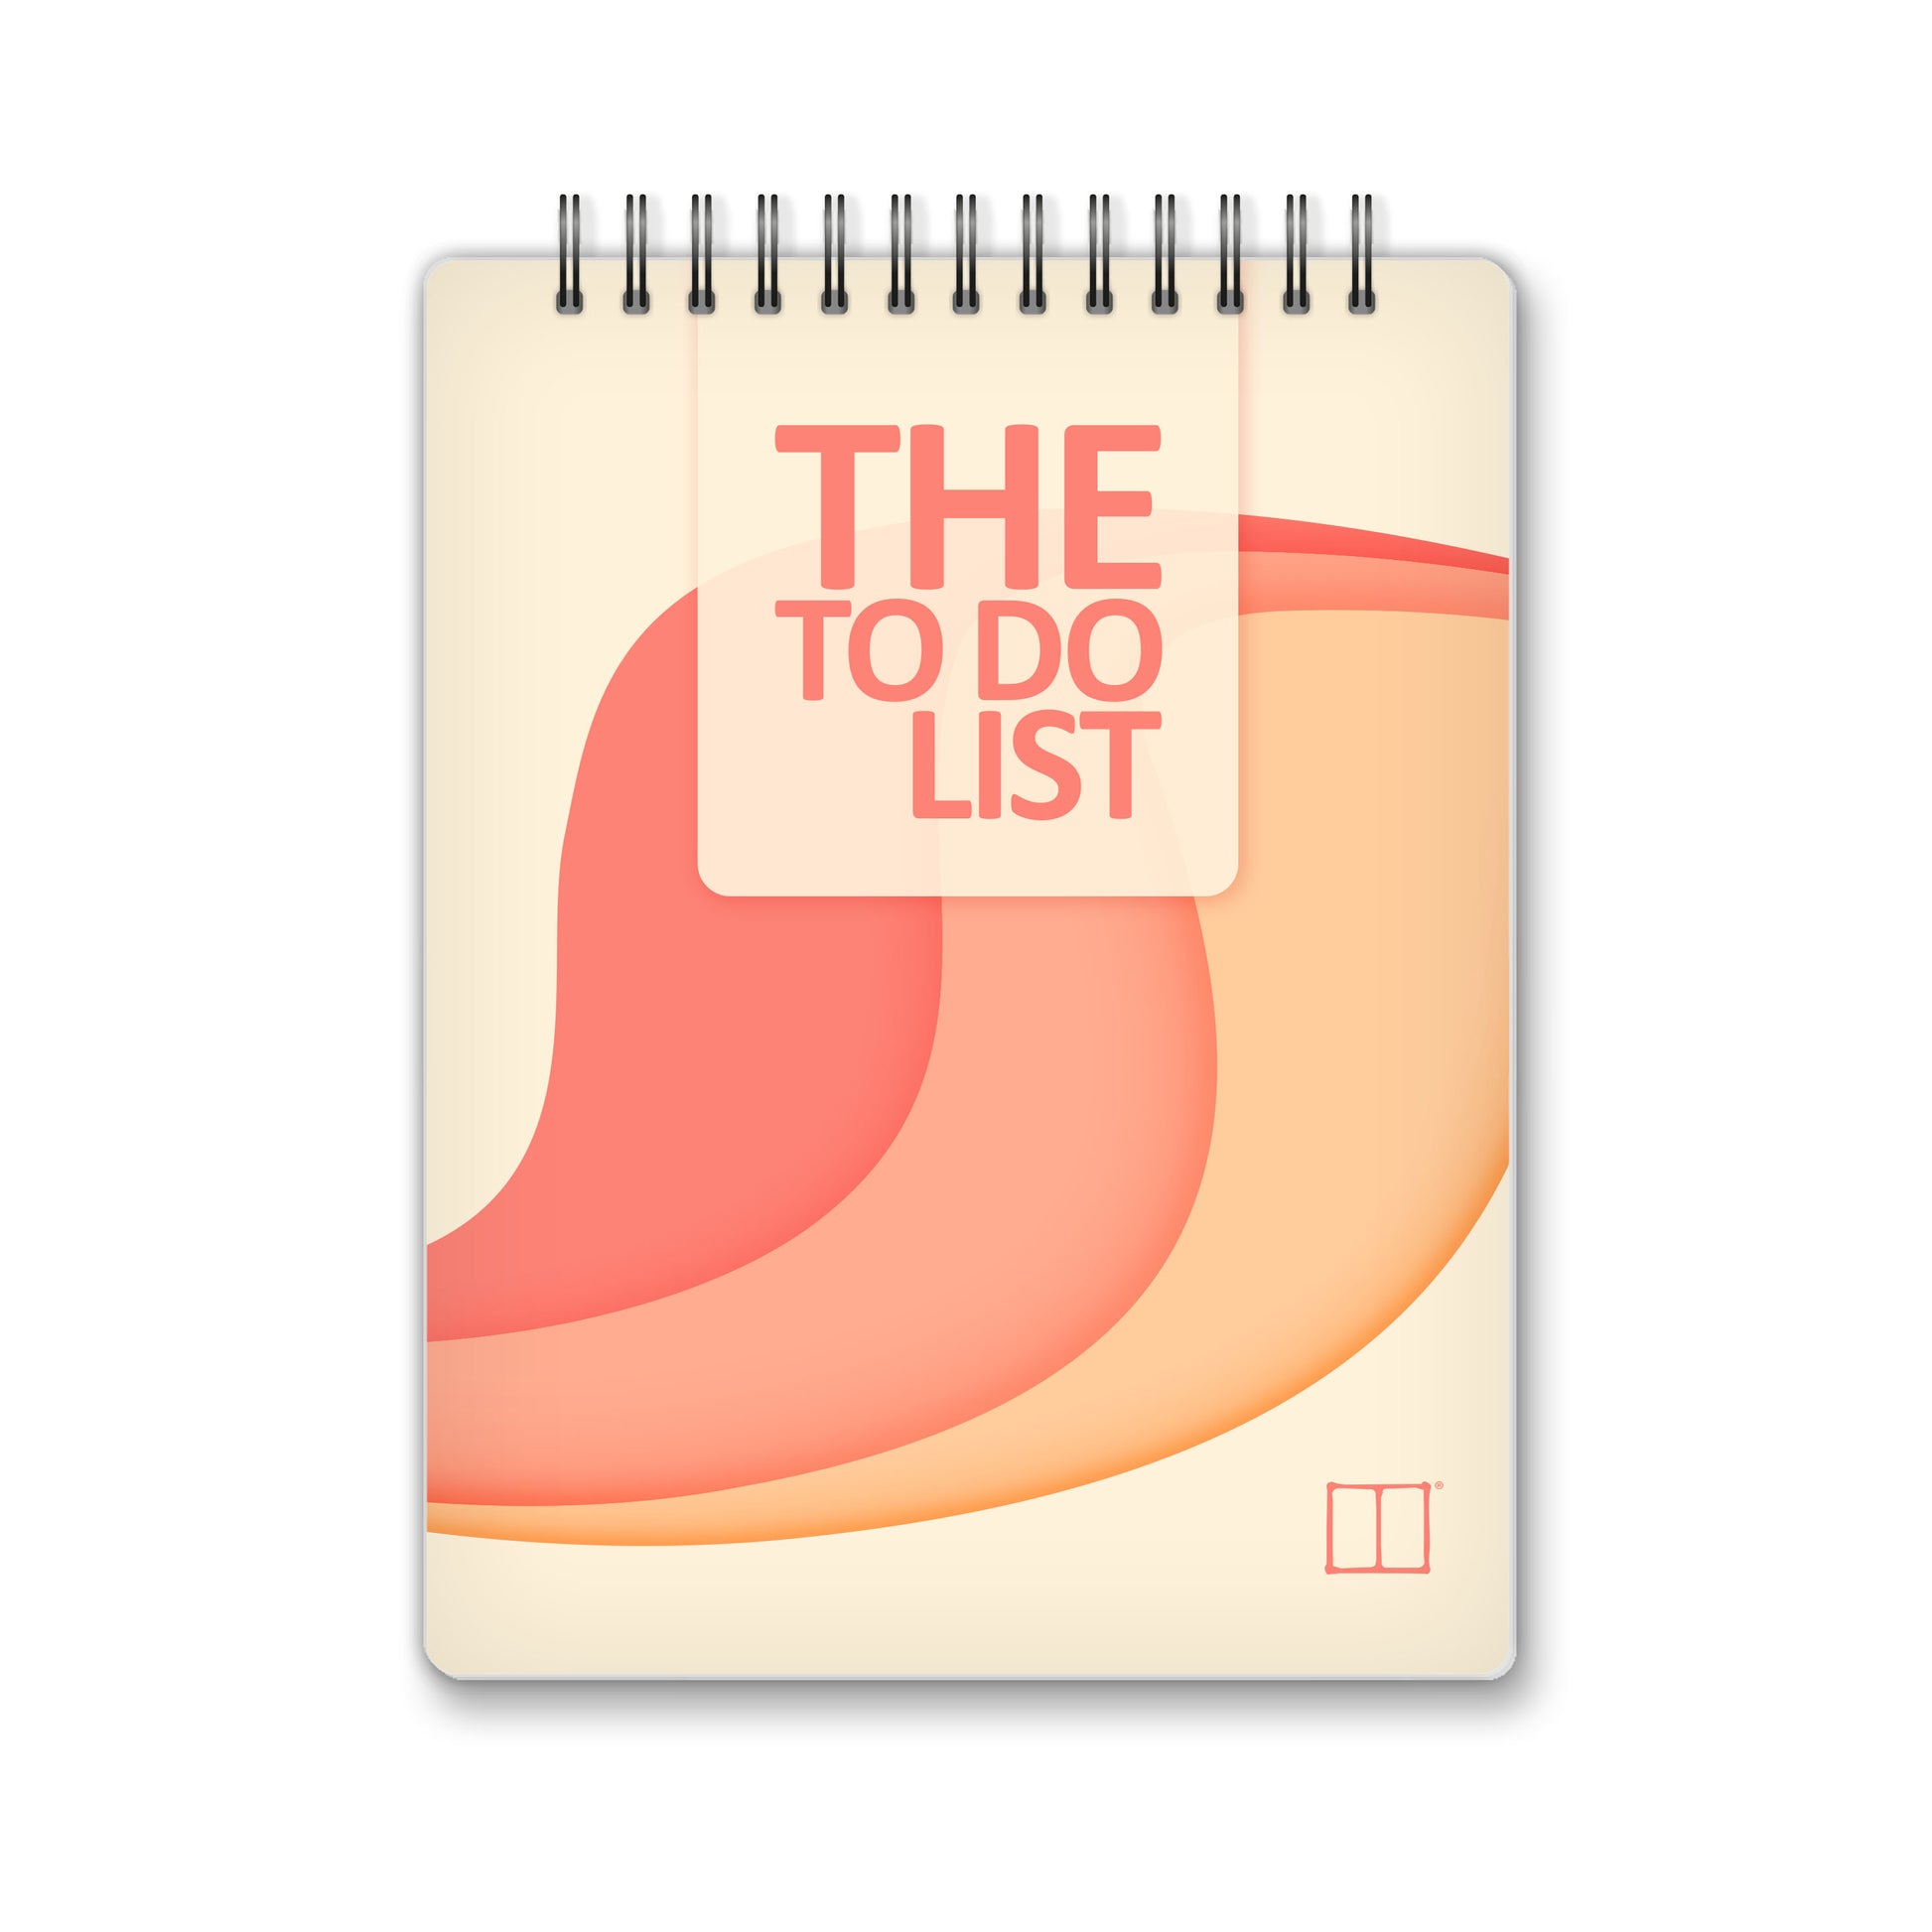 The To Do List Bundle - 8 To Do List notebooks 10% discount SketchBook Stationery